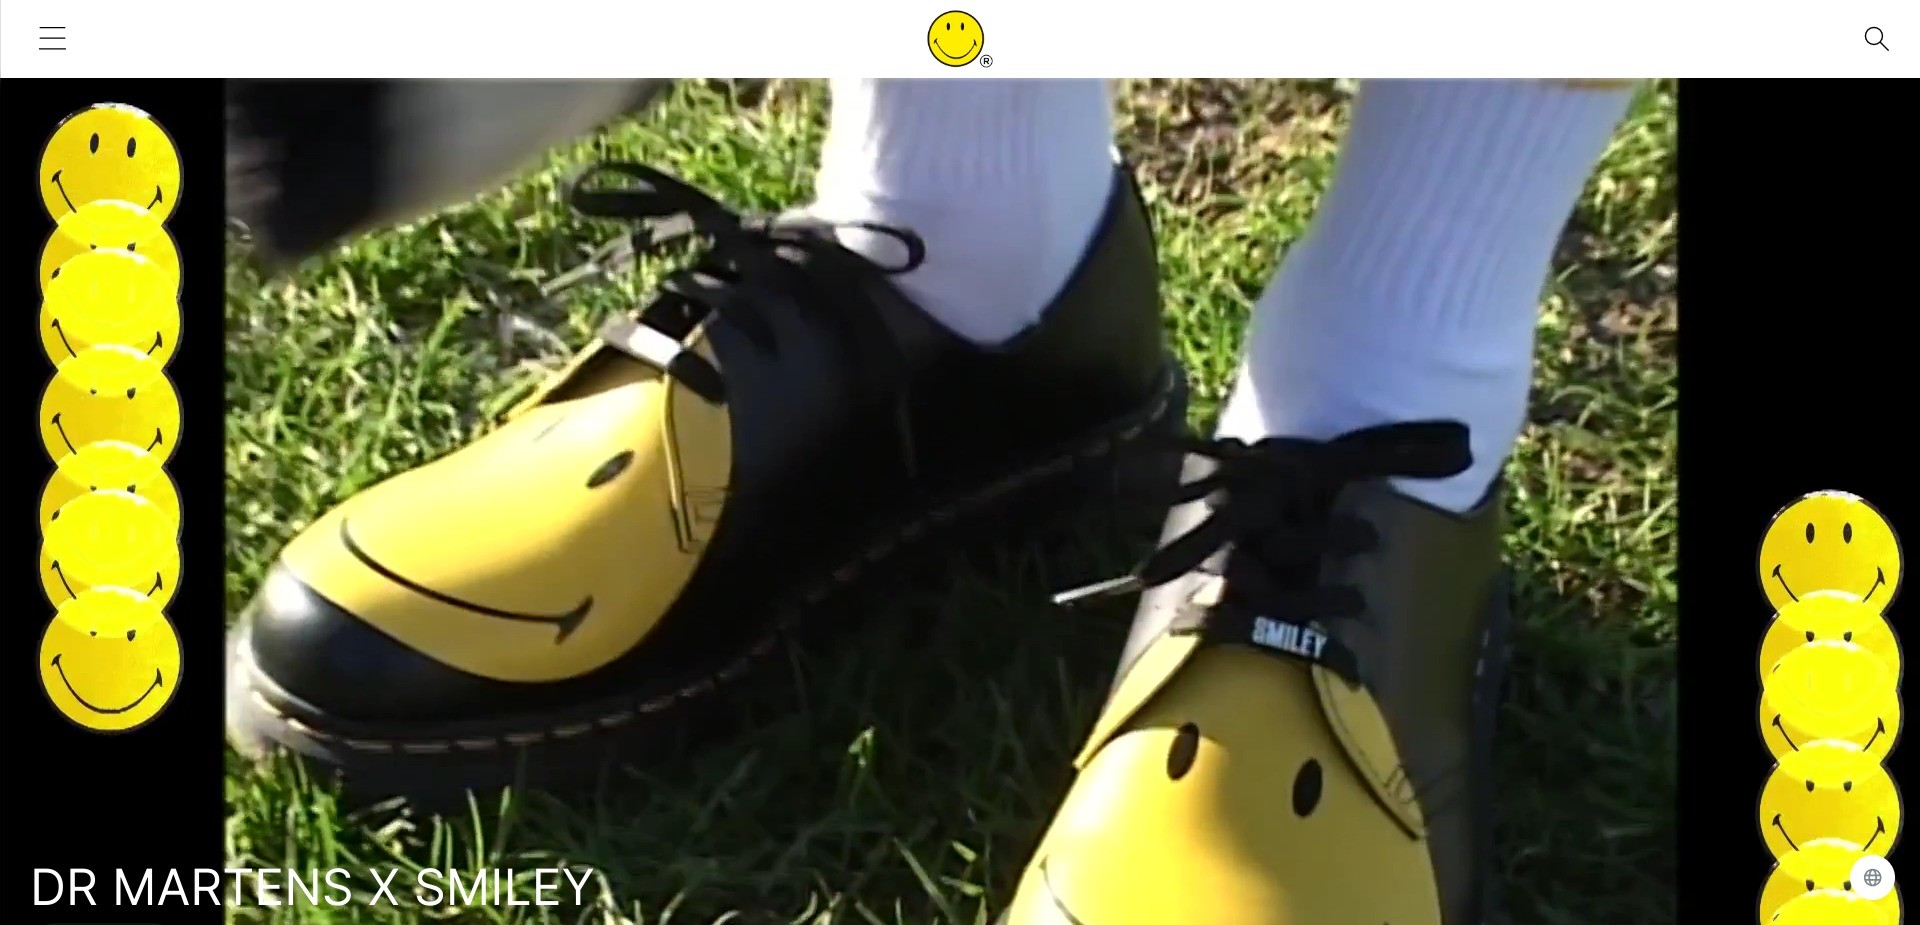 Screenshot of smiley.com displaying a still image from a Dr Martens X Smiley commercial